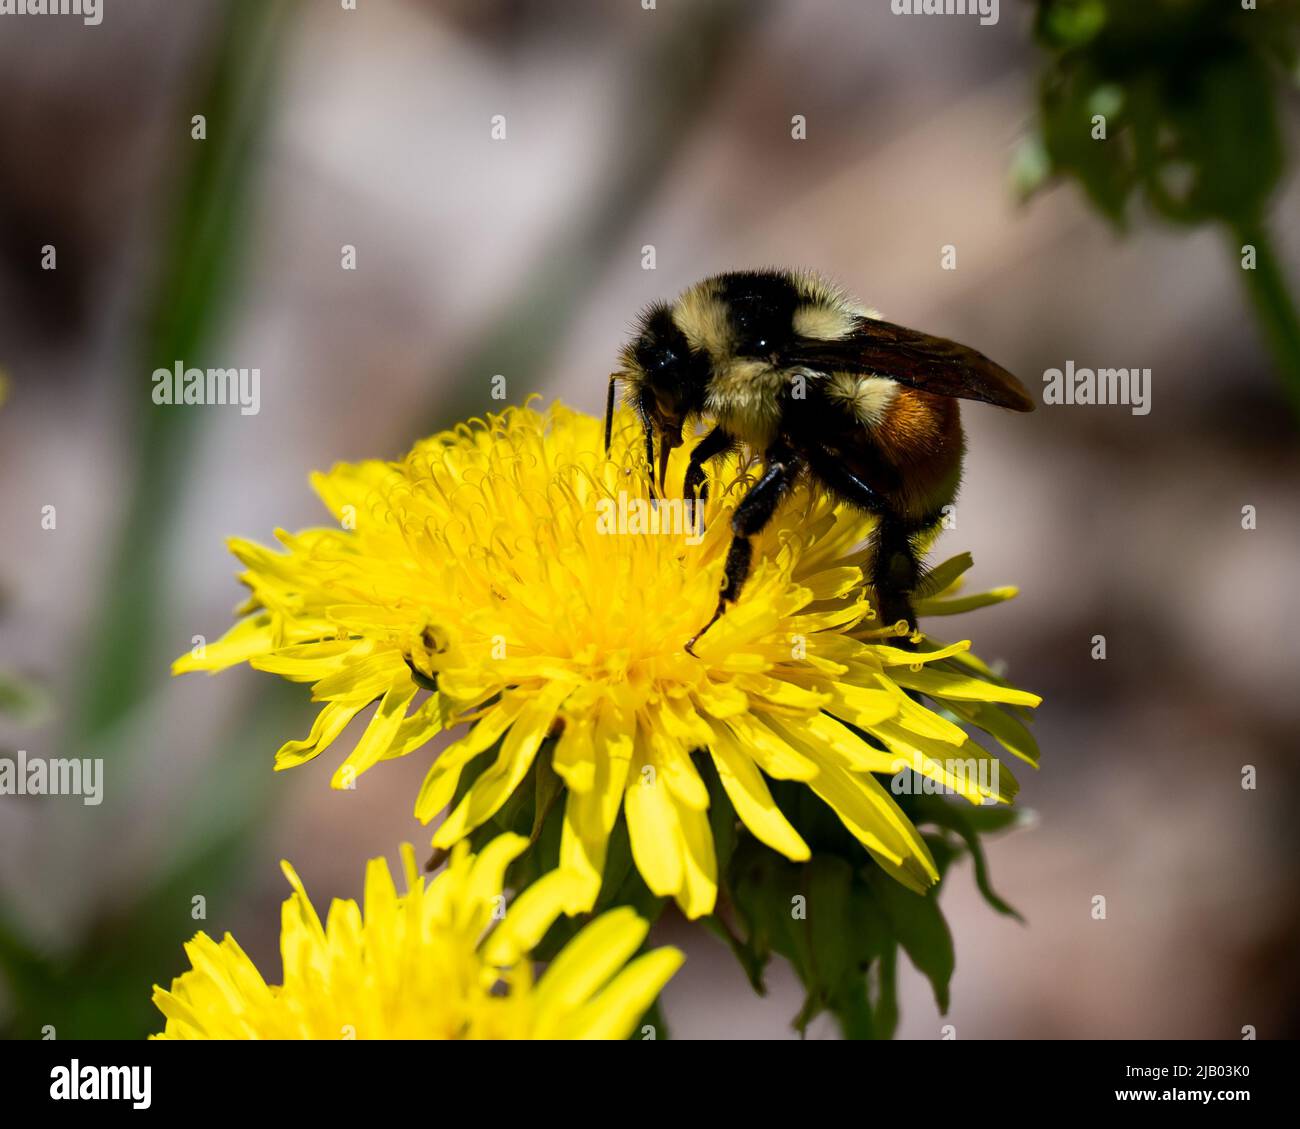 A bumblebee feeding on and pollinating a dandelion flower in spring Stock Photo